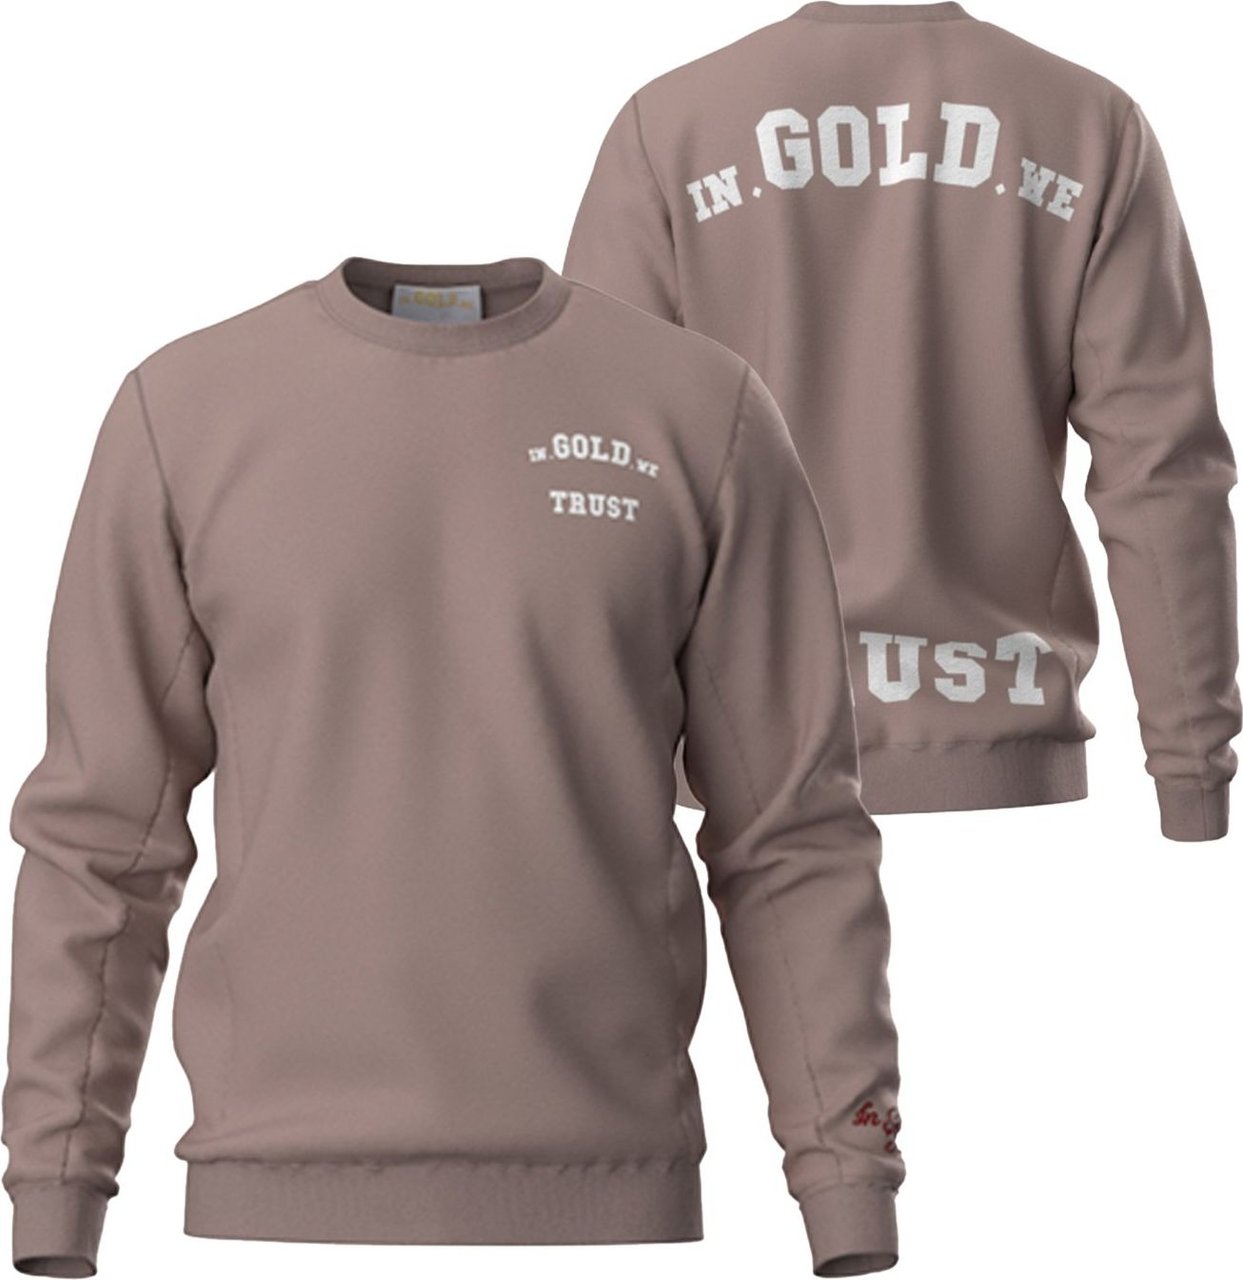 In Gold We Trust In Gold We Trust Crewneck The Slim 2.0 Fawn Taupe